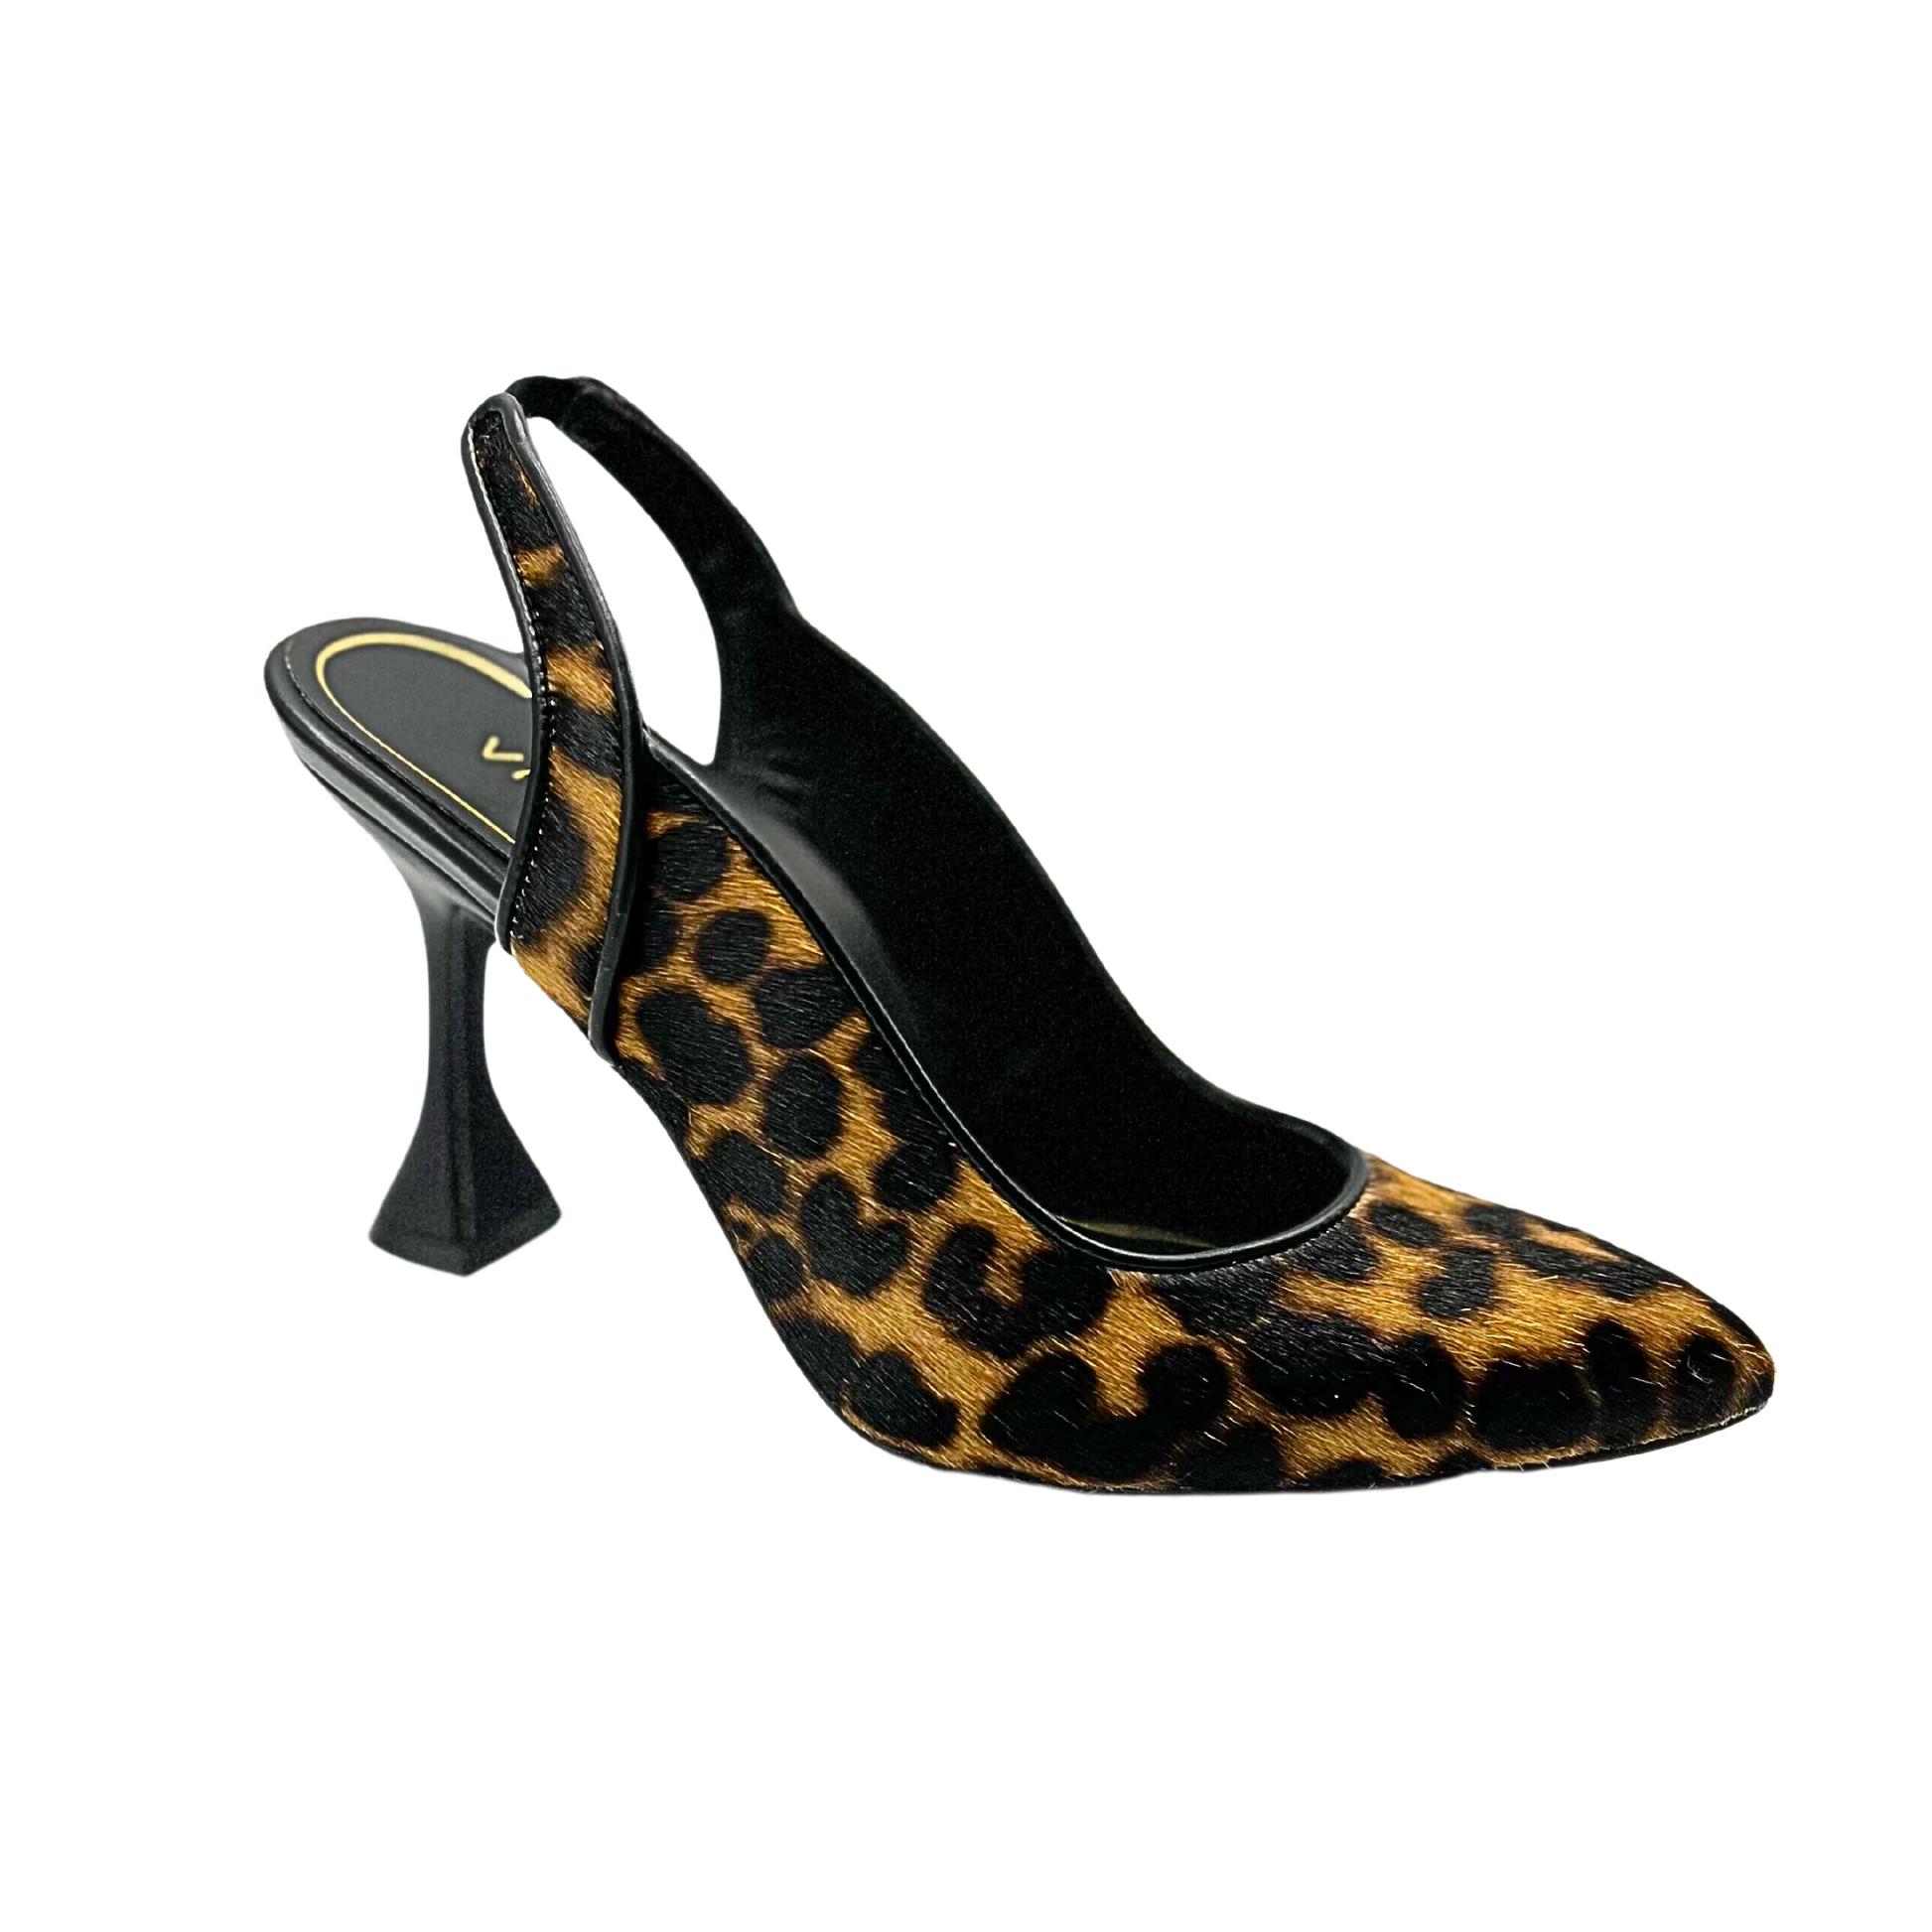 Angled front view of a slingback sandal in a leopard print leather.  